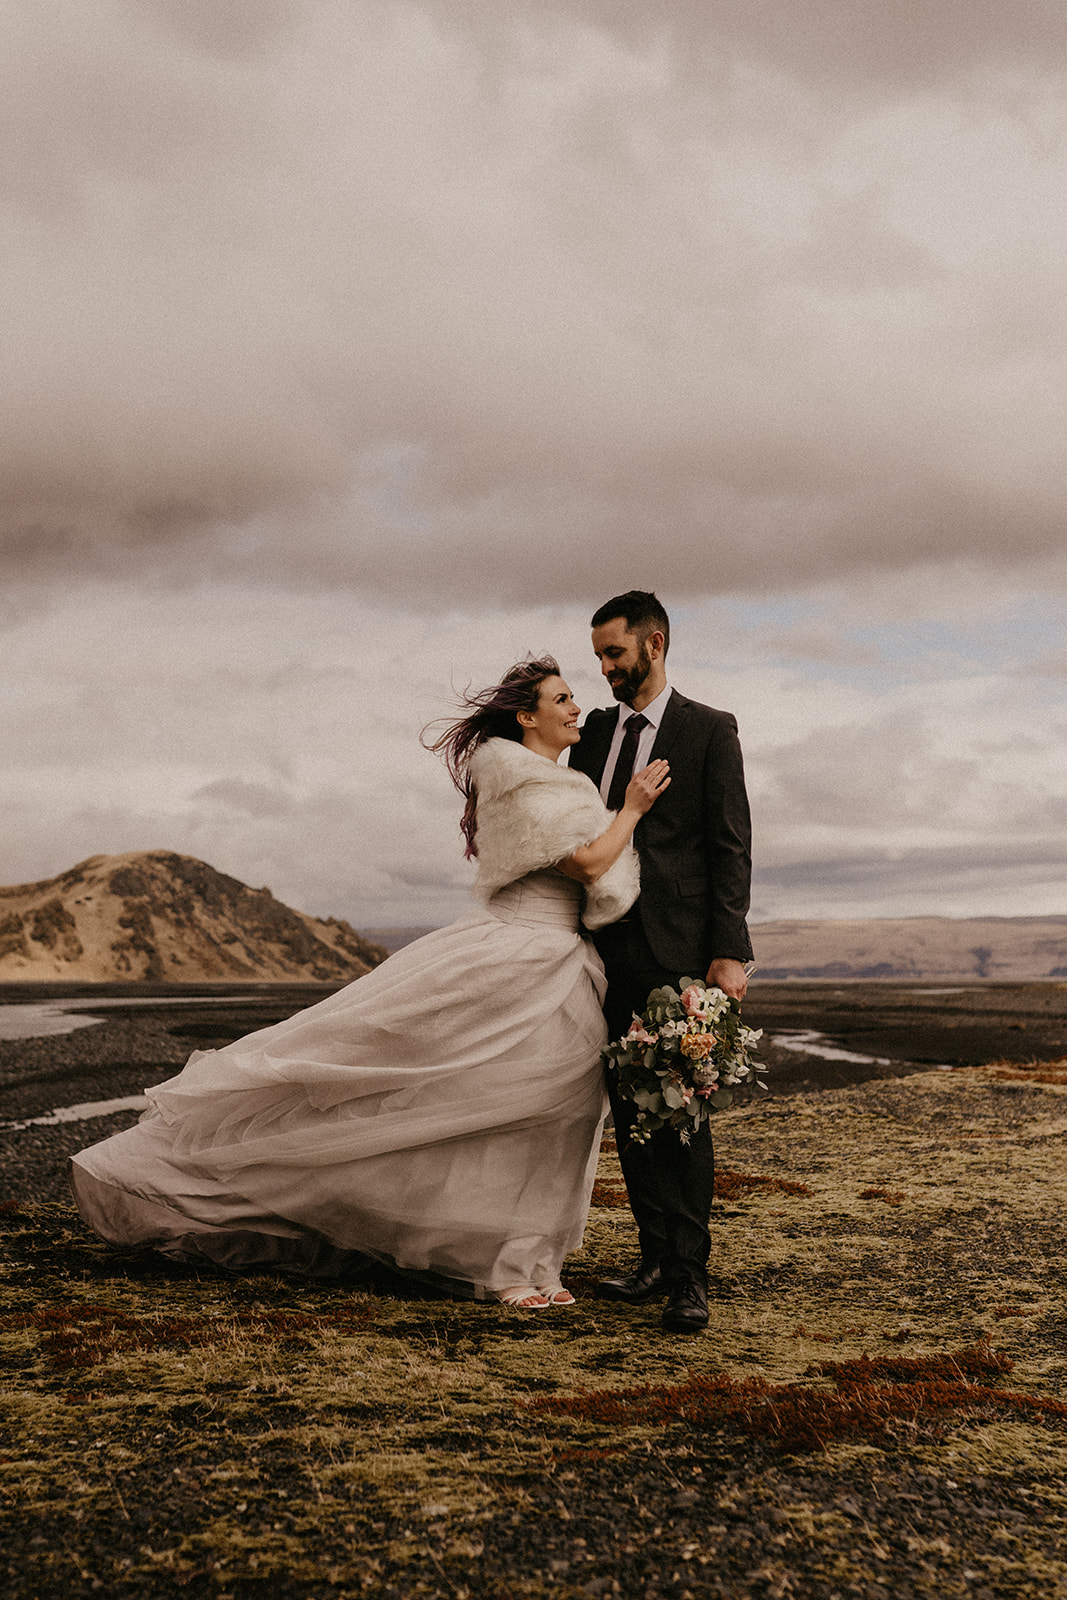 Eloping in Iceland with majestic views and romantic vibes